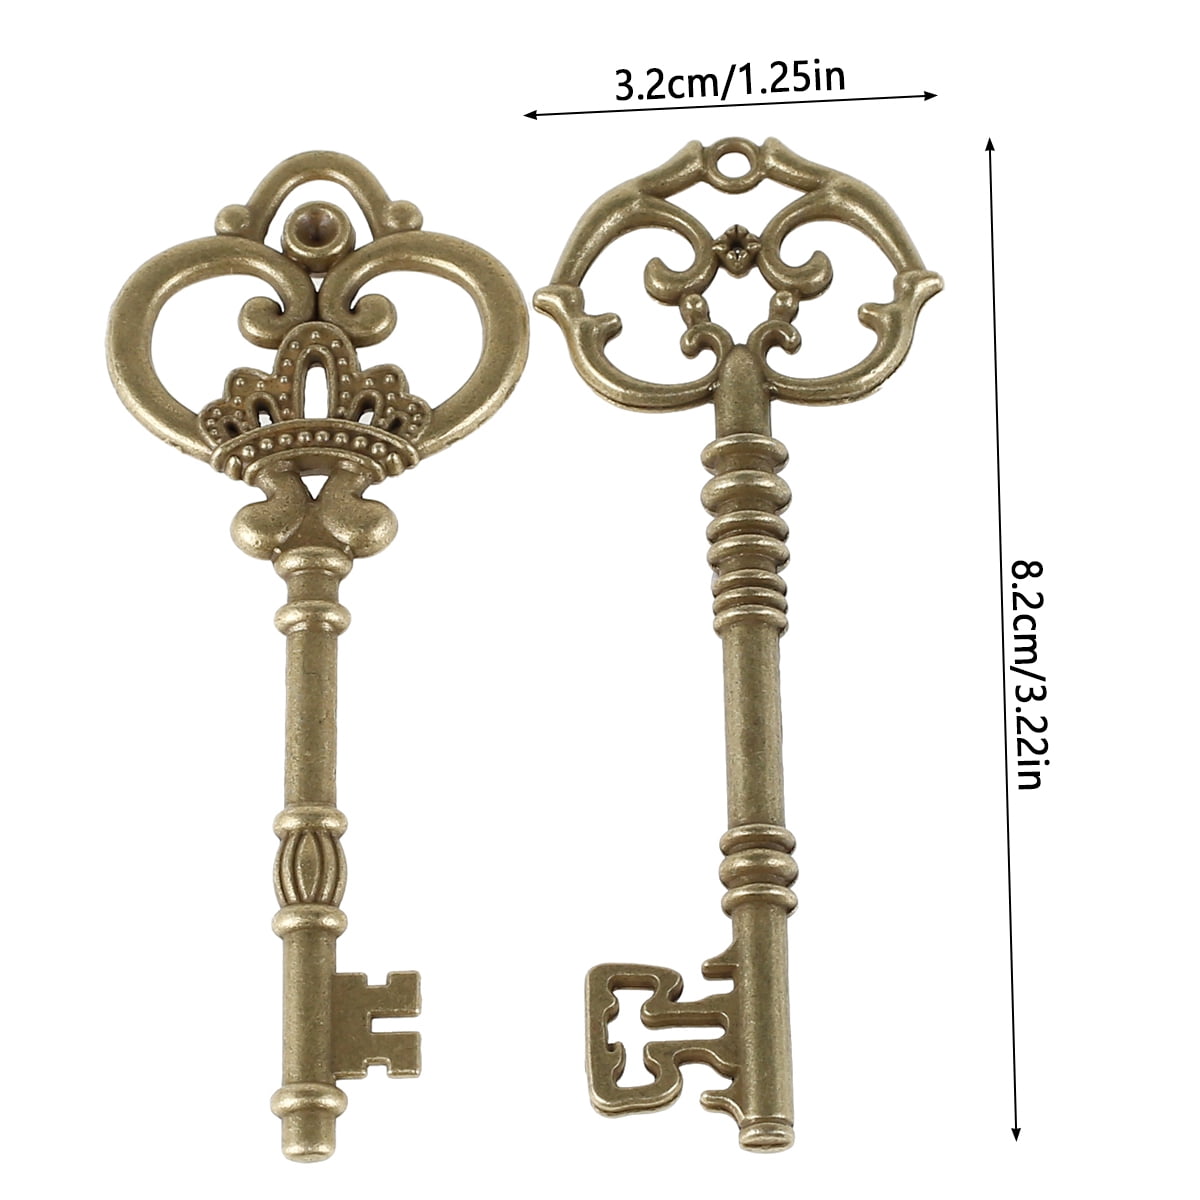 JIALEEY Vintage Skeleton Key Charms, 23 Type of 46PCS Antique Bronze Key  Charms for Necklace Pendant DIY Jewelry Making Supplies Wedding Favors